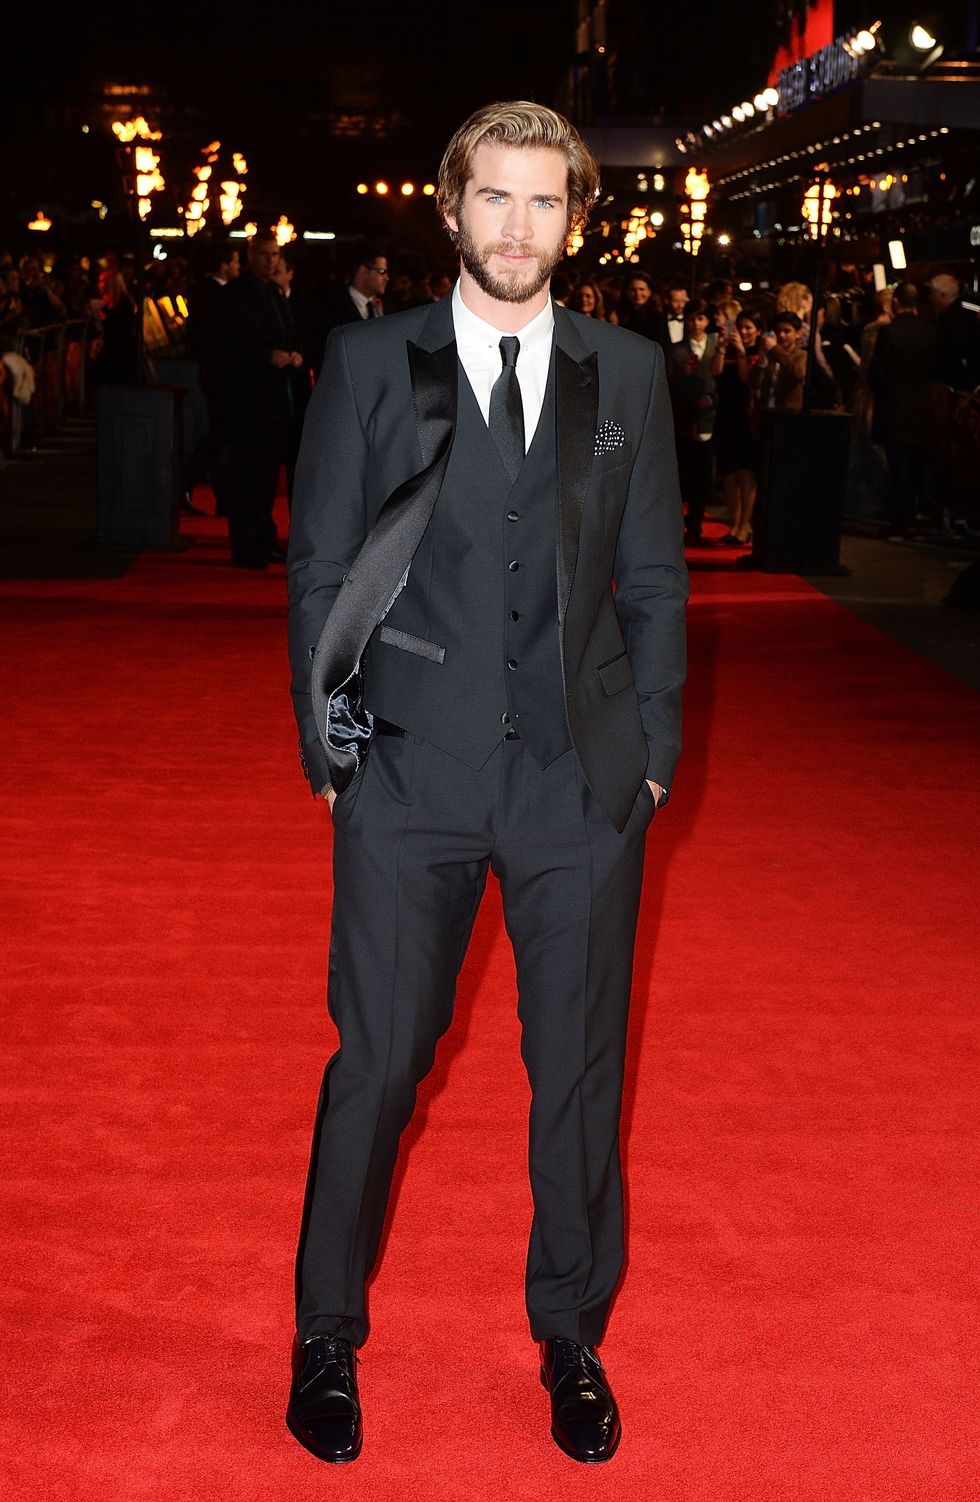 Liam Hemsworth at the Hunger Games: Mockingjay Part 1 premiere in London